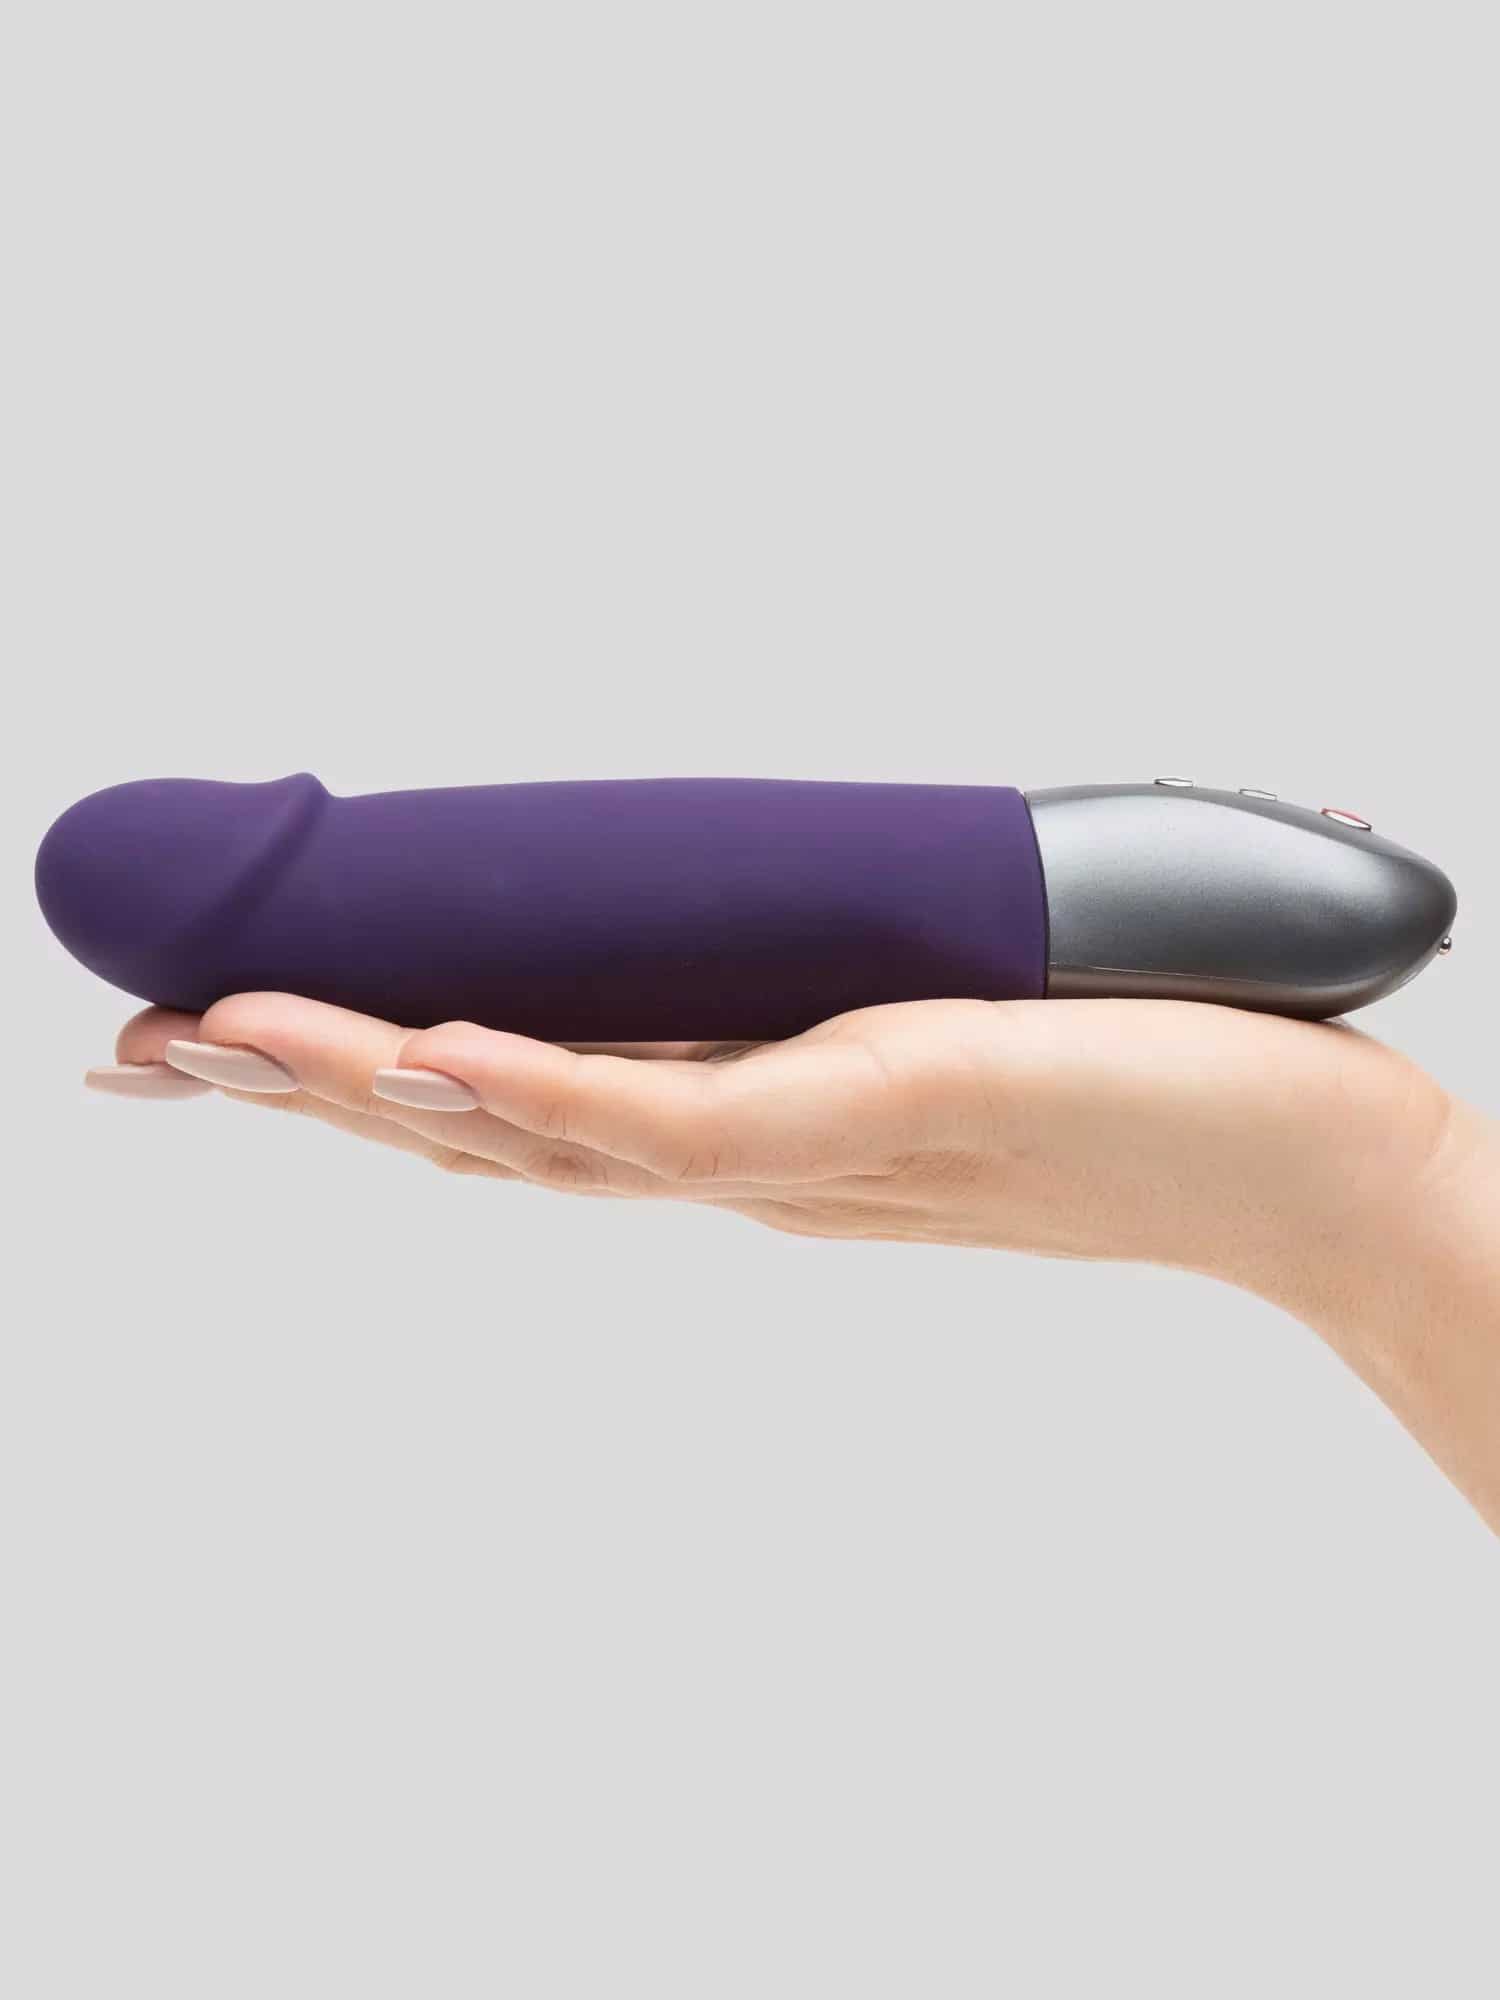 Fun Factory Stronic Real Rechargeable Realistic Thrusting Vibrator. Slide 5